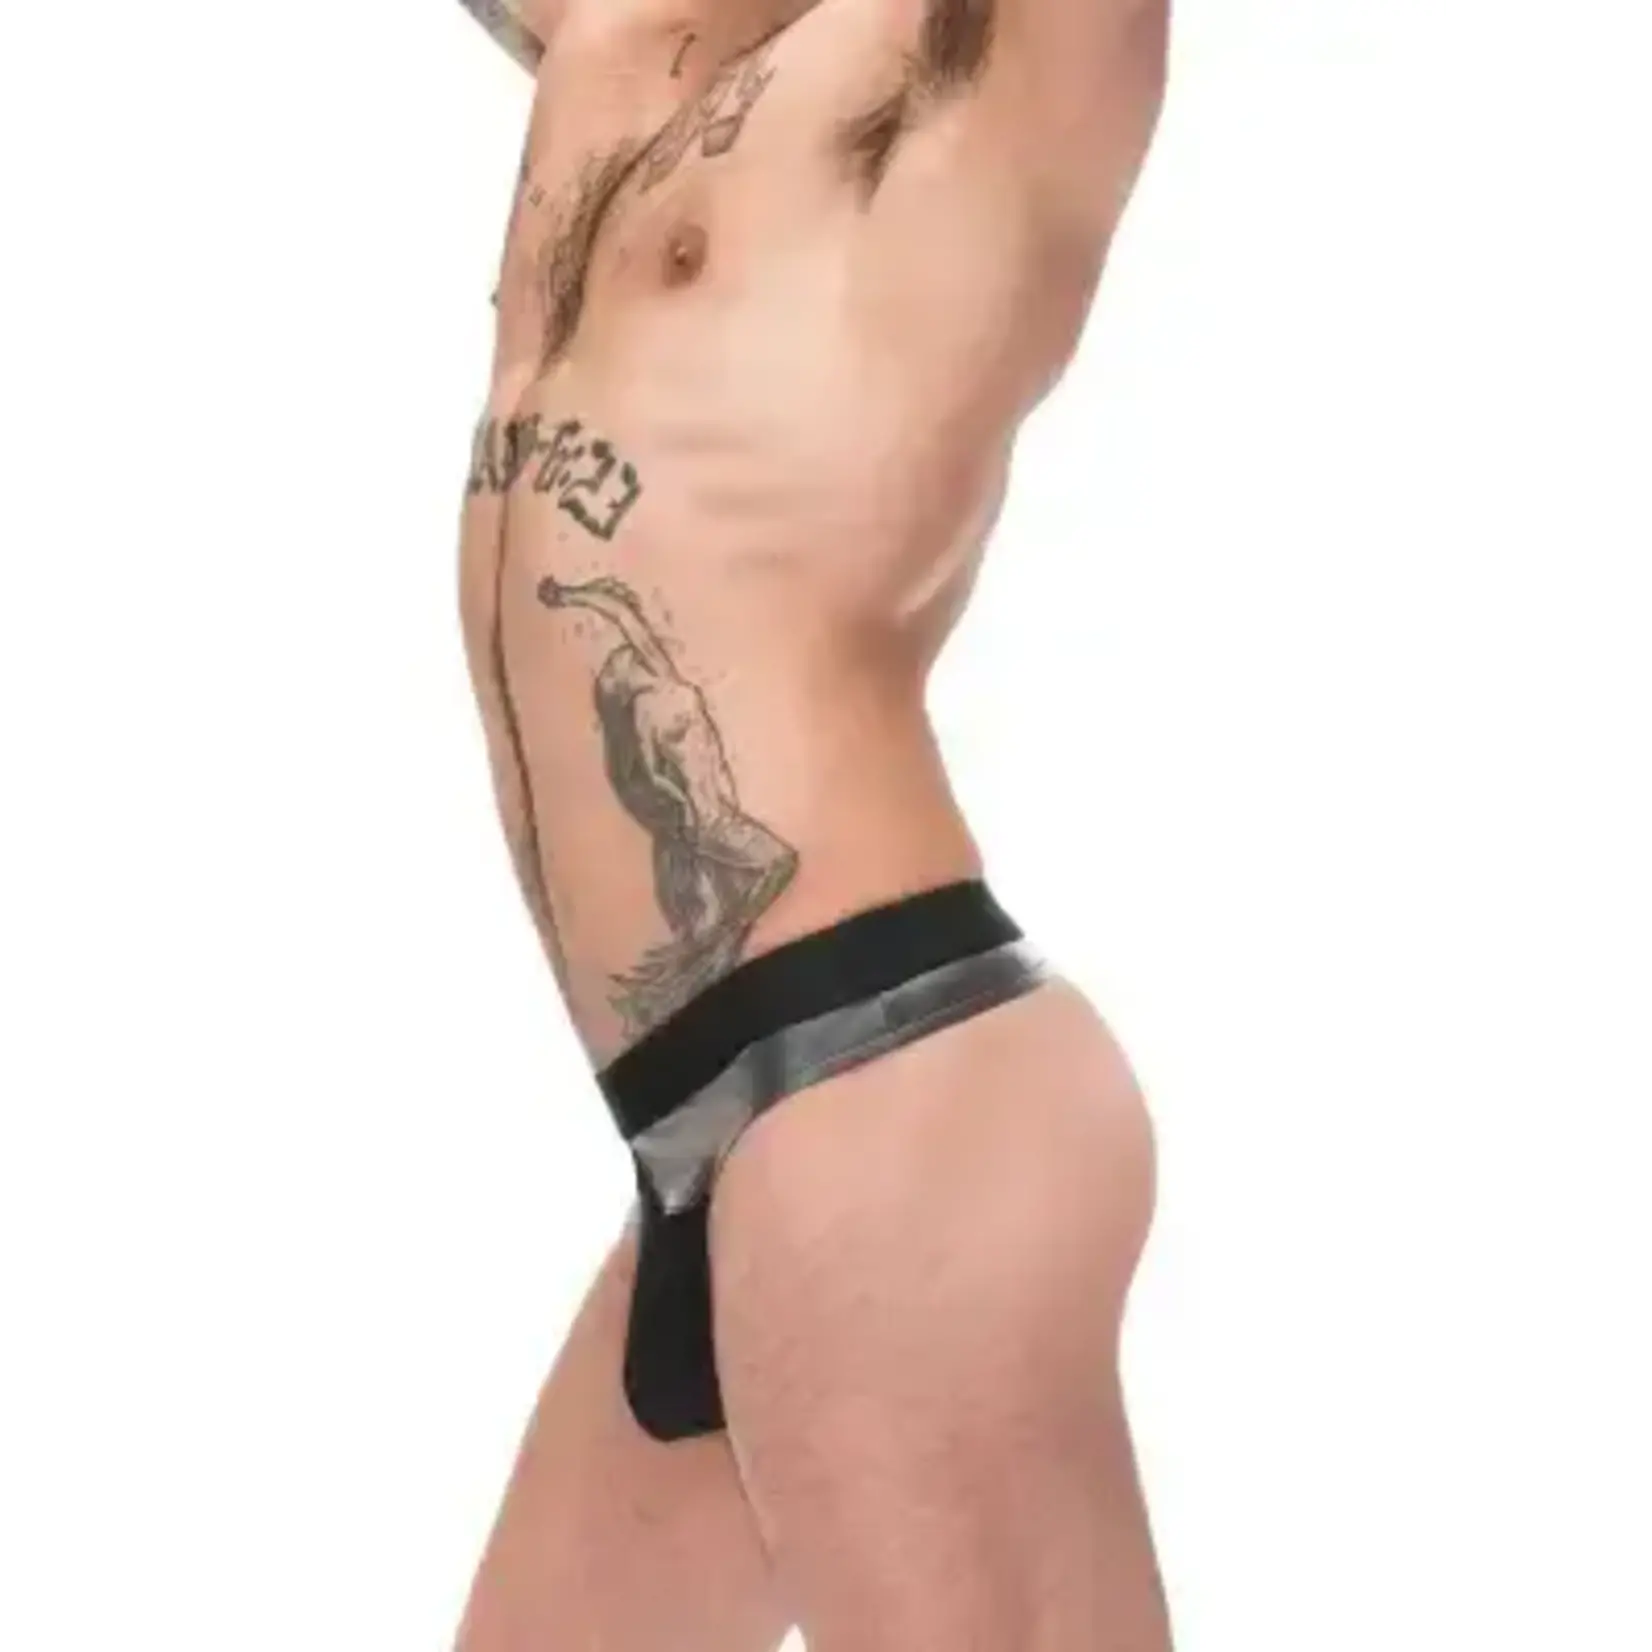 MALE POWER MALE POWER -  IRON CLAD THONG GREY-BLACK MALE POWER -  IRON CLAD THONG GREY-BLACK S/M